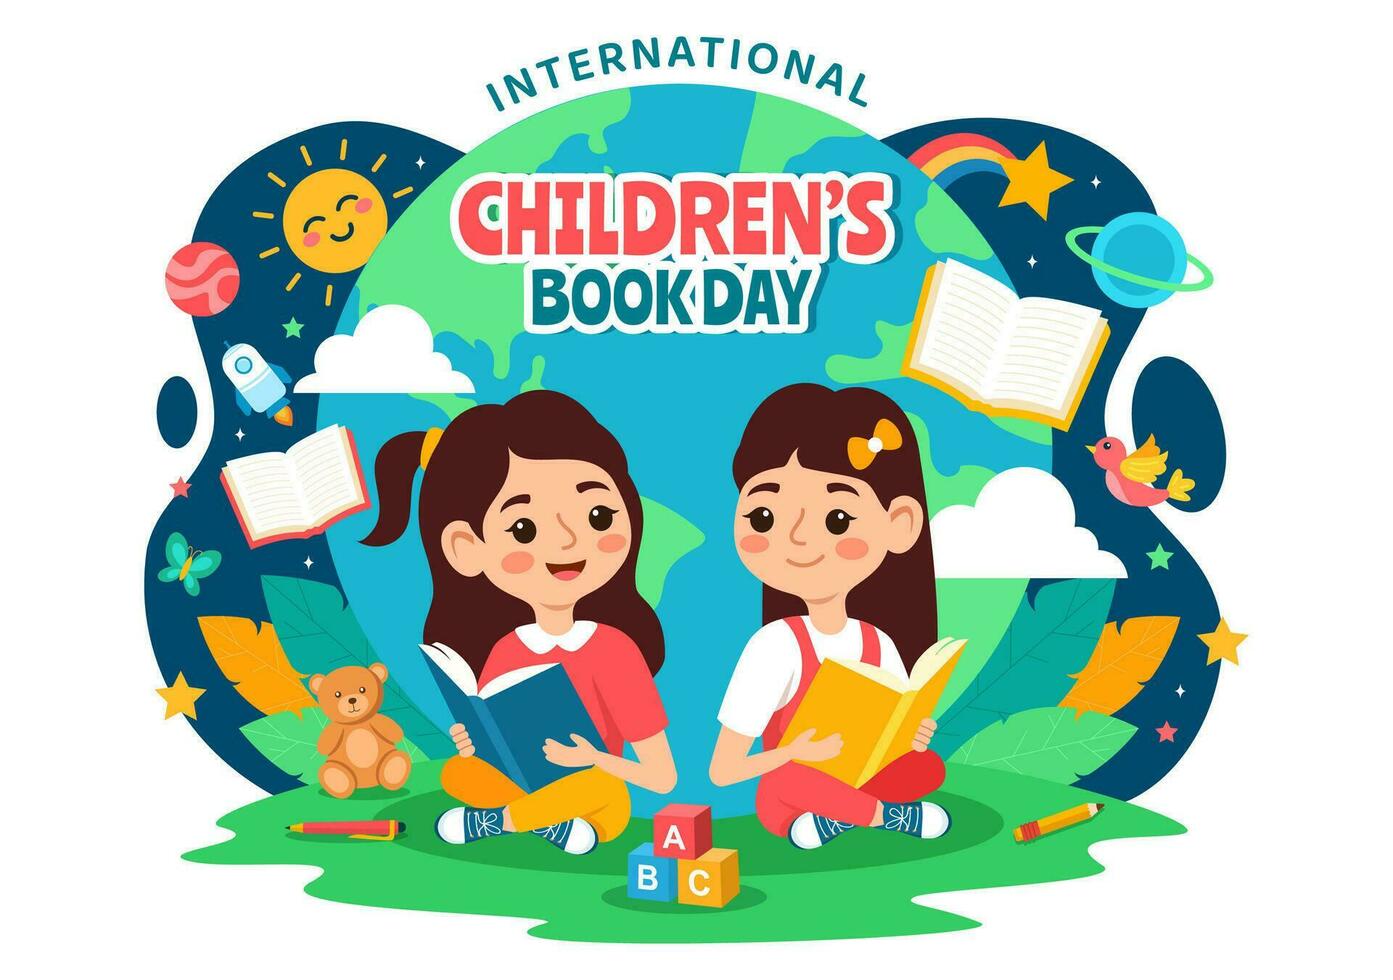 International Children's Book Day Vector Illustration on 2 April with Kids Reading a Books and Globe Map in Flat Cartoon Background Design